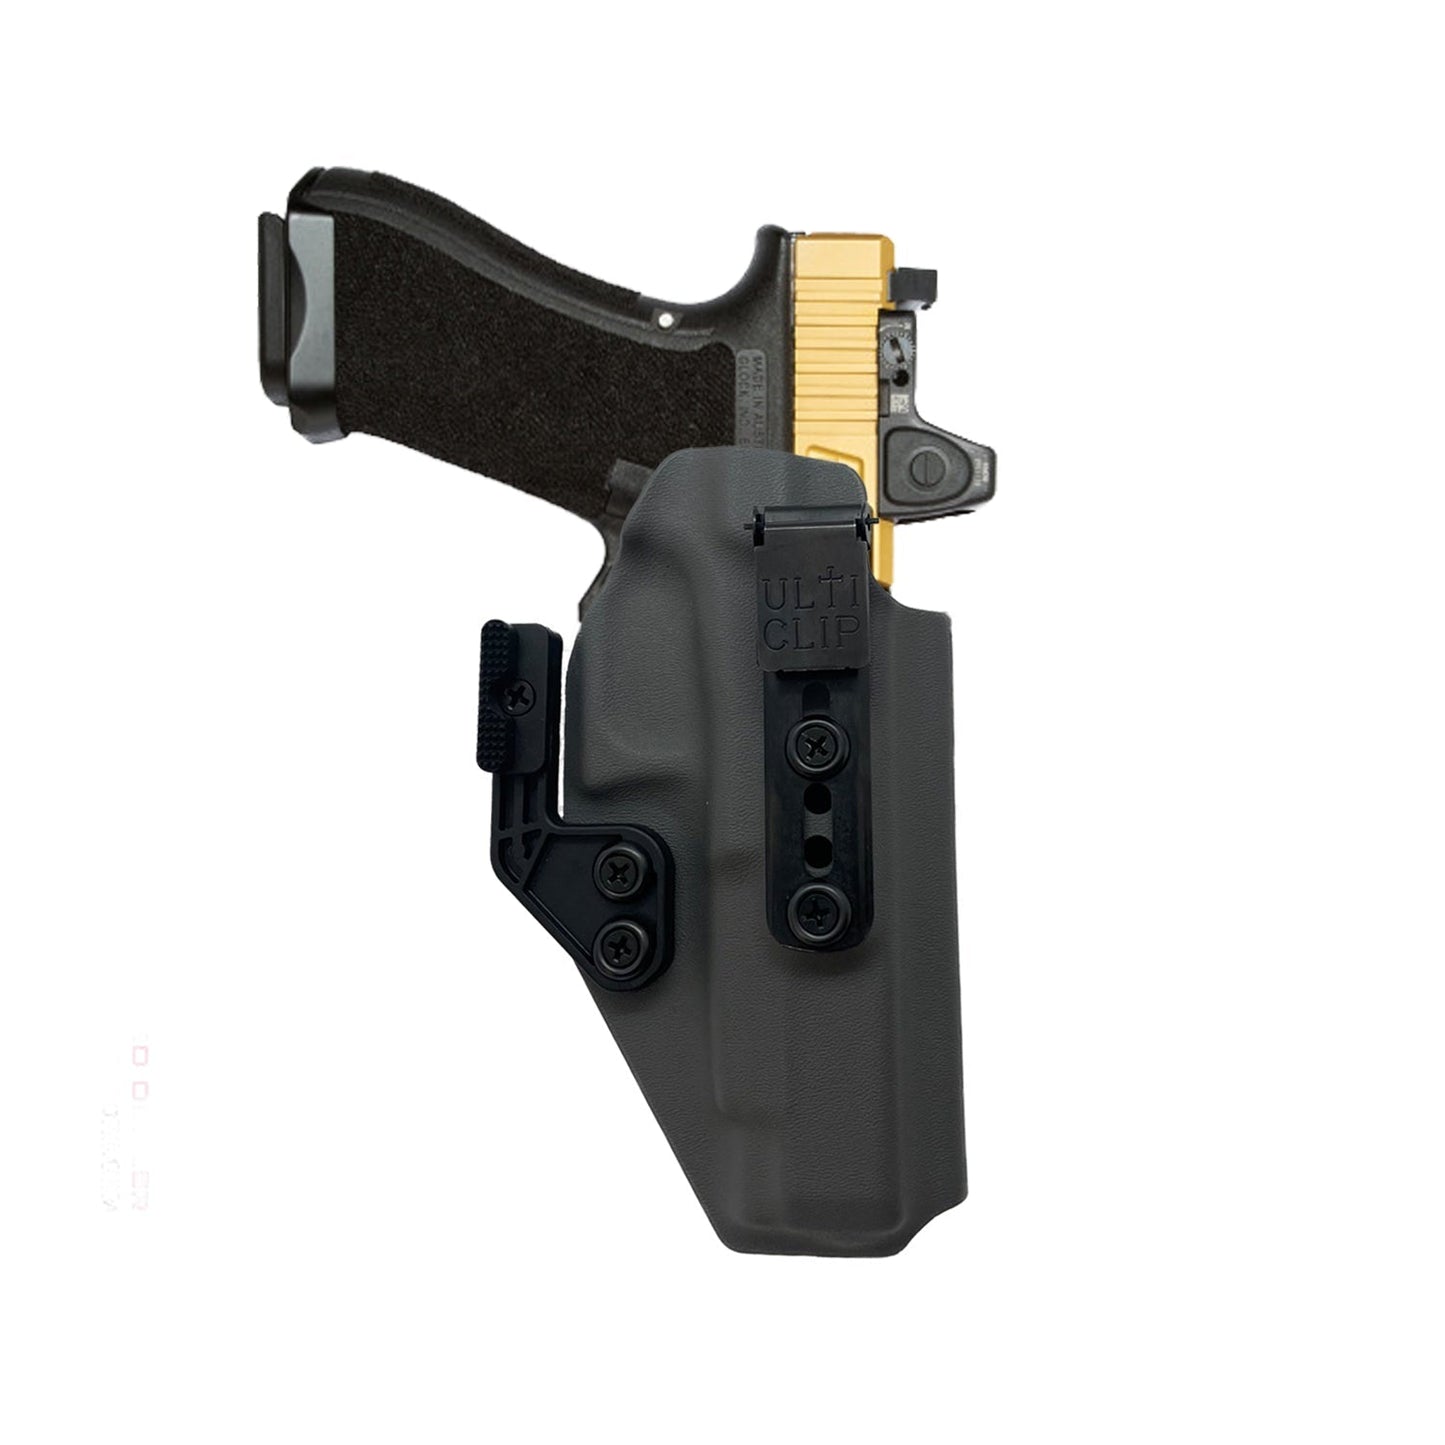 SIG P365XL WIth TLR6 Light (ULTI-CLIP 3) IWB (Inside The Waistband Holster)